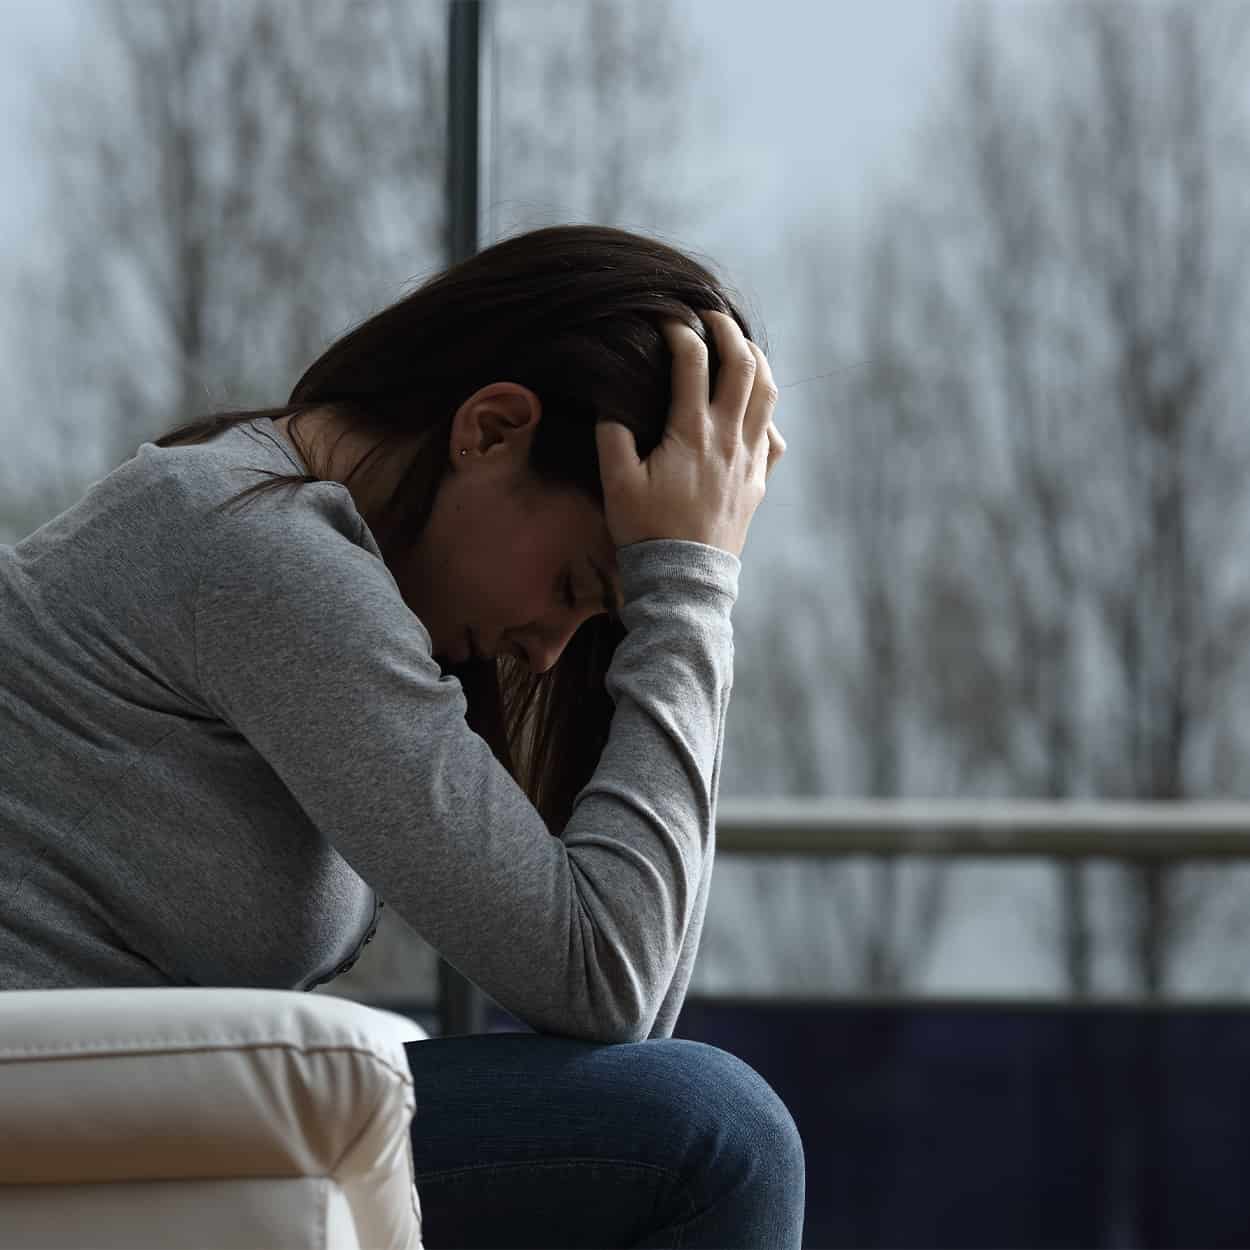 woman struggling with addiction recovery process